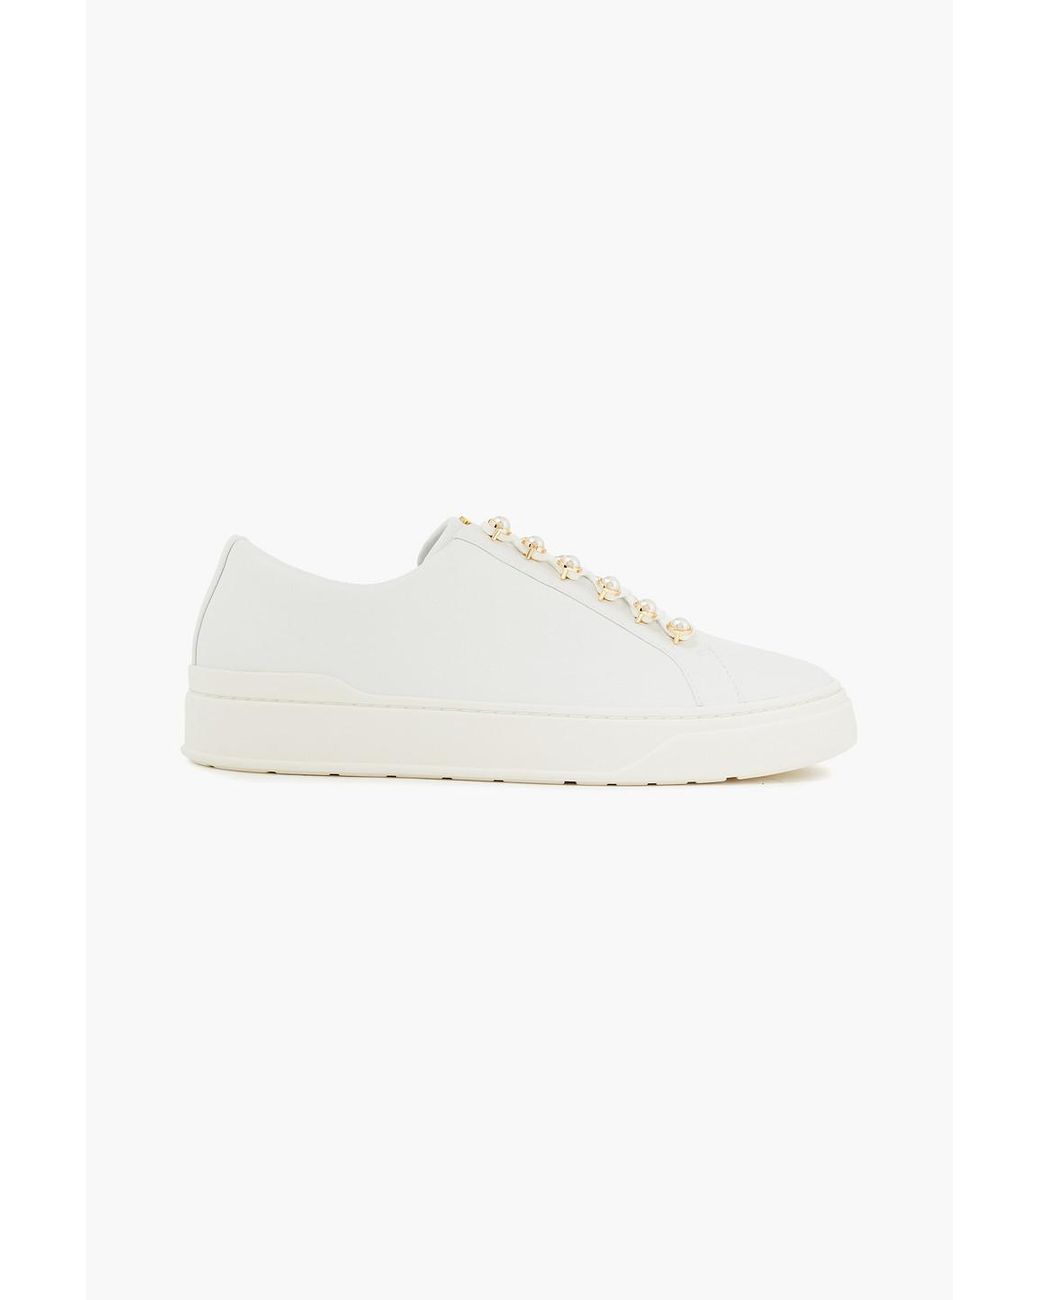 Stuart Weitzman Excelsa Embellished Leather Sneakers in White | Lyst Canada